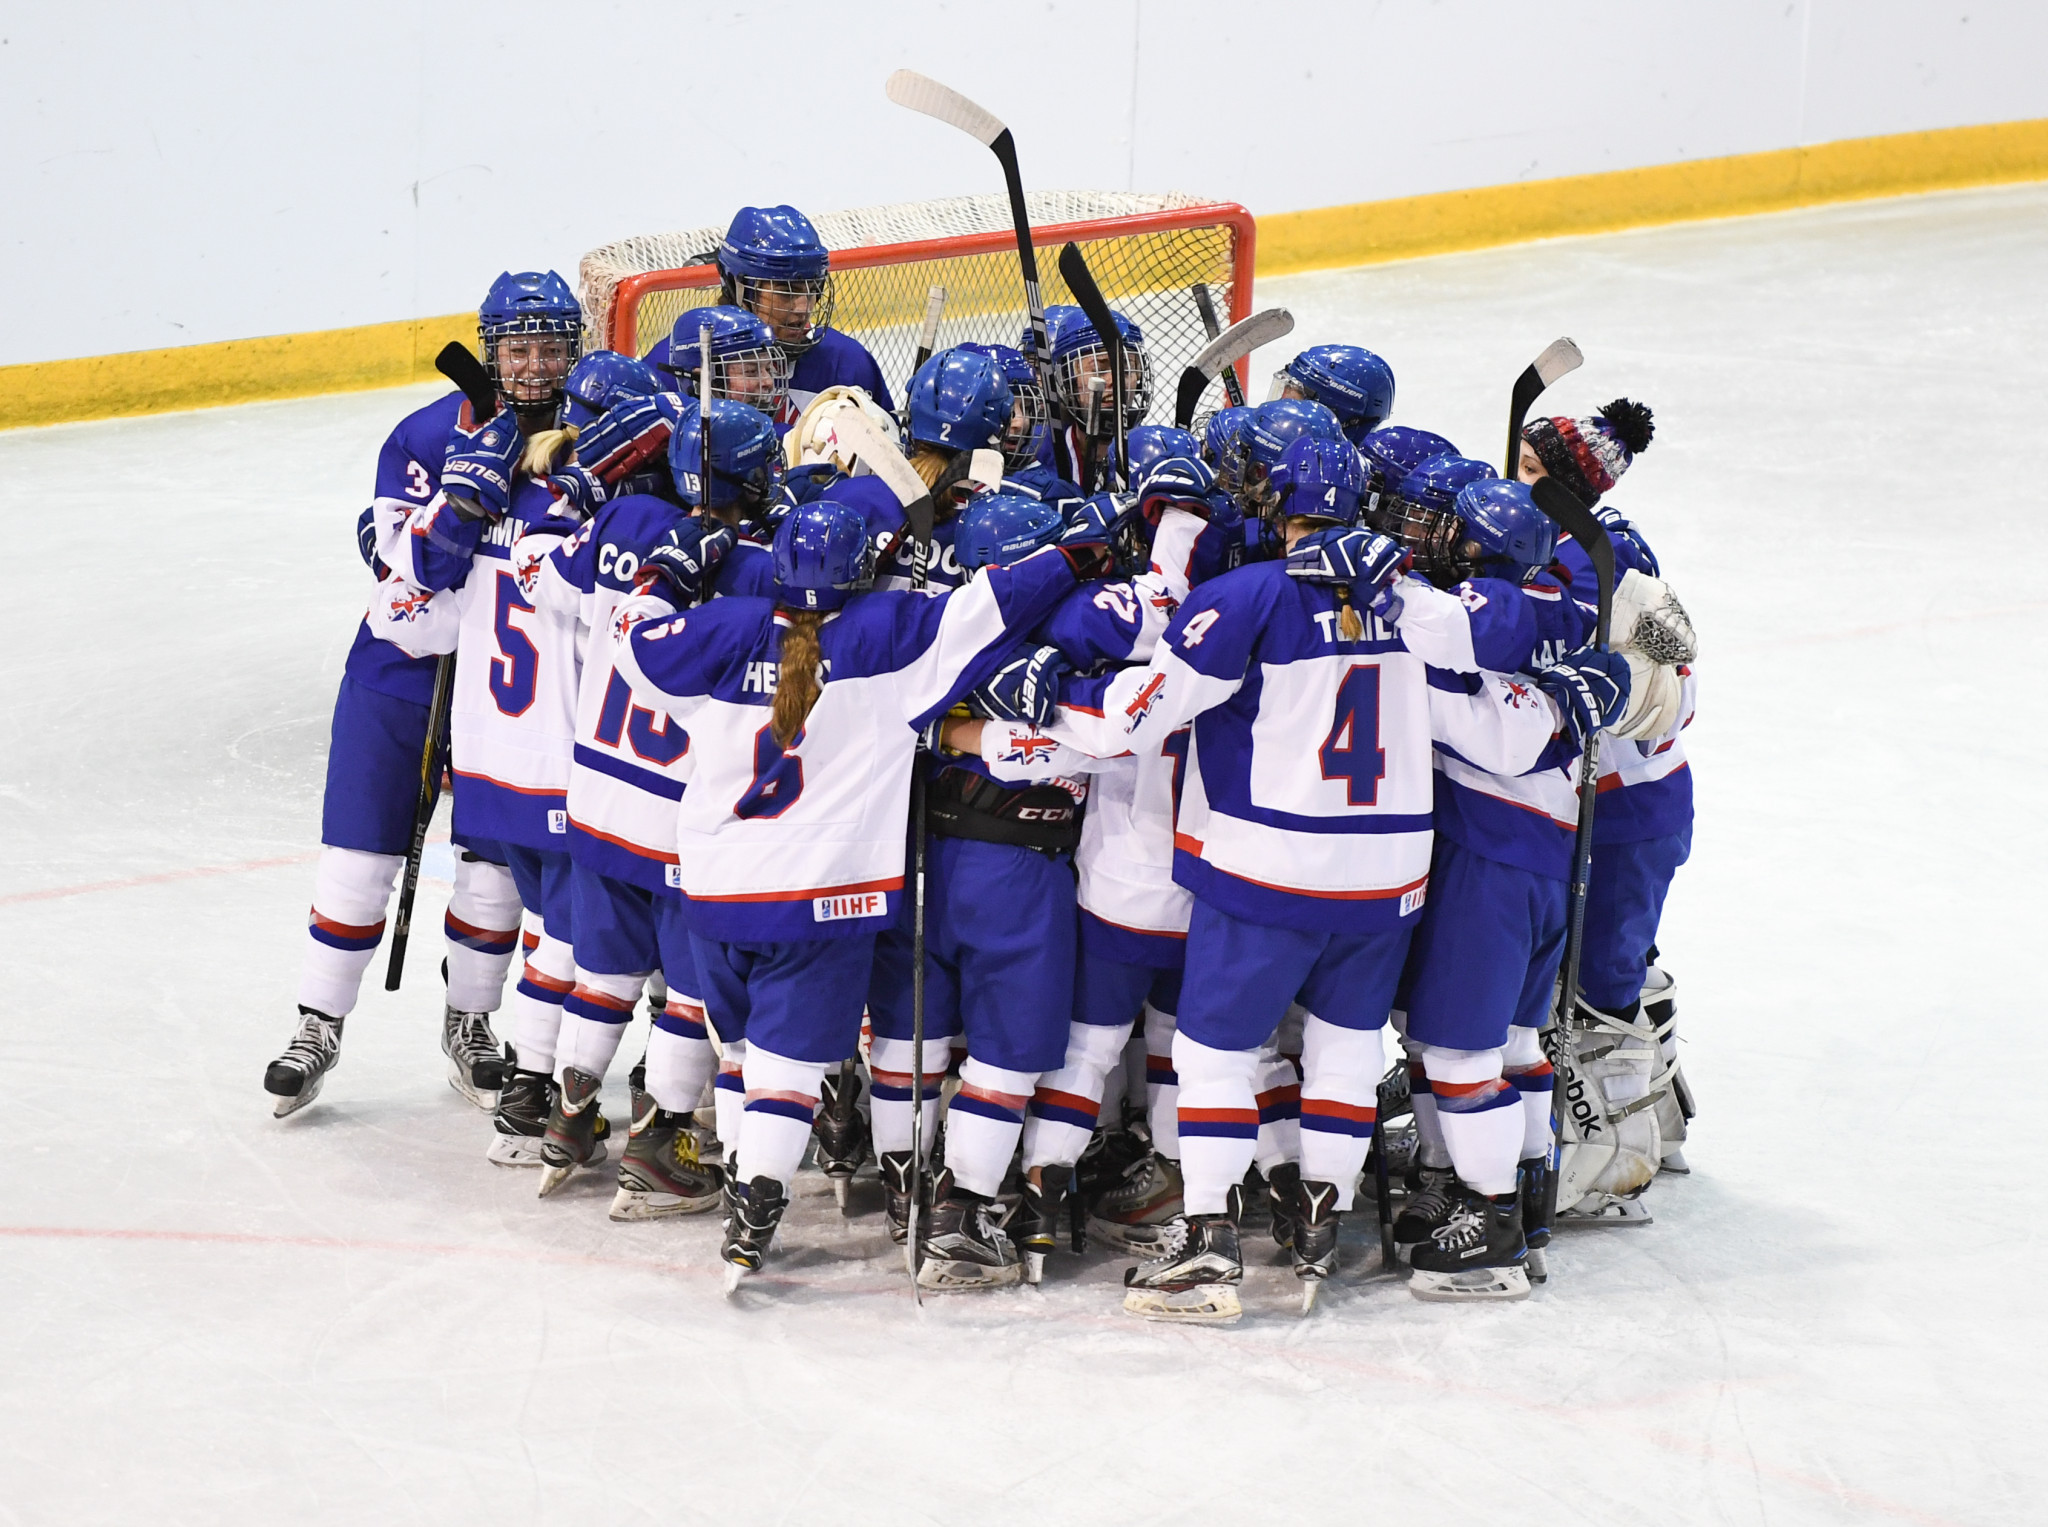 The schedule for the 2019 International Ice Hockey Federation (IIHF) Women’s World Championship Division II Group A in Dumfries has been announced ©Ice Hockey UK 